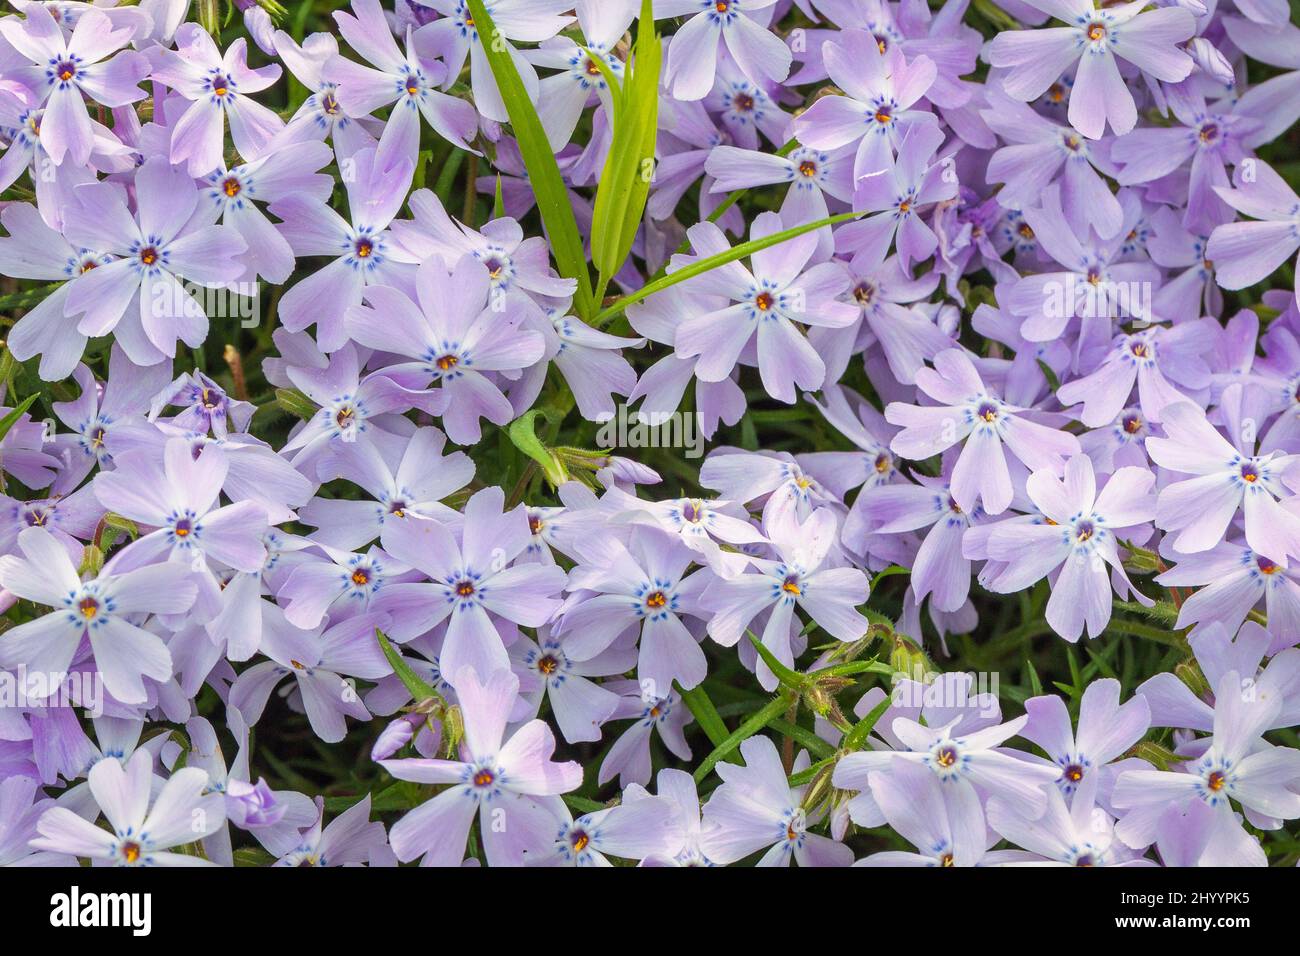 Flowers of Phlox douglasii, background formed by a group of white flowers. Stock Photo